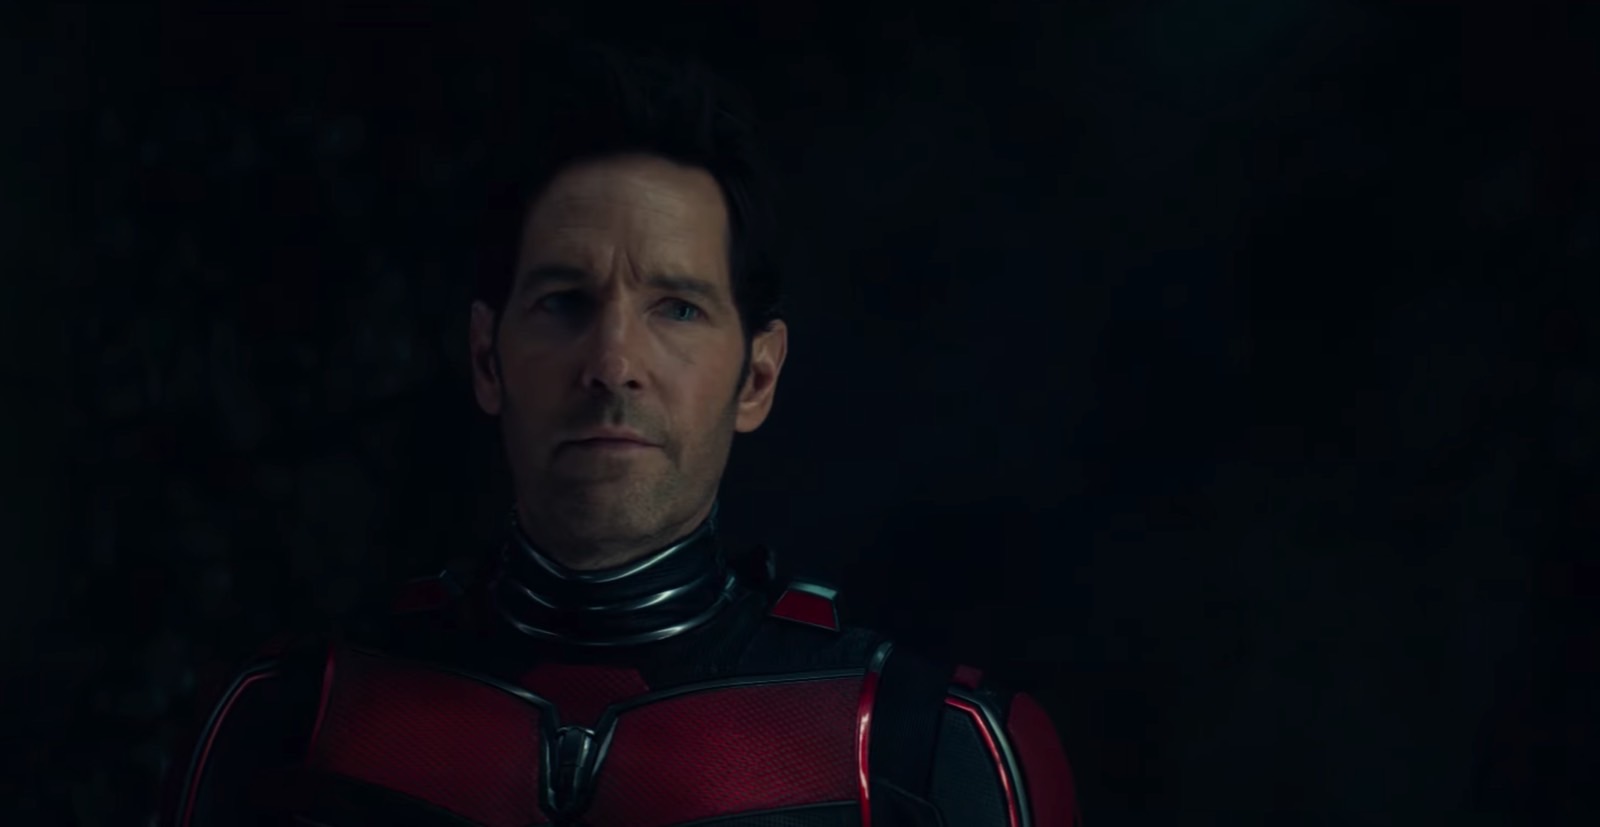 Ant-Man and the Wasp: Quantumania may be 2023's best Marvel movie